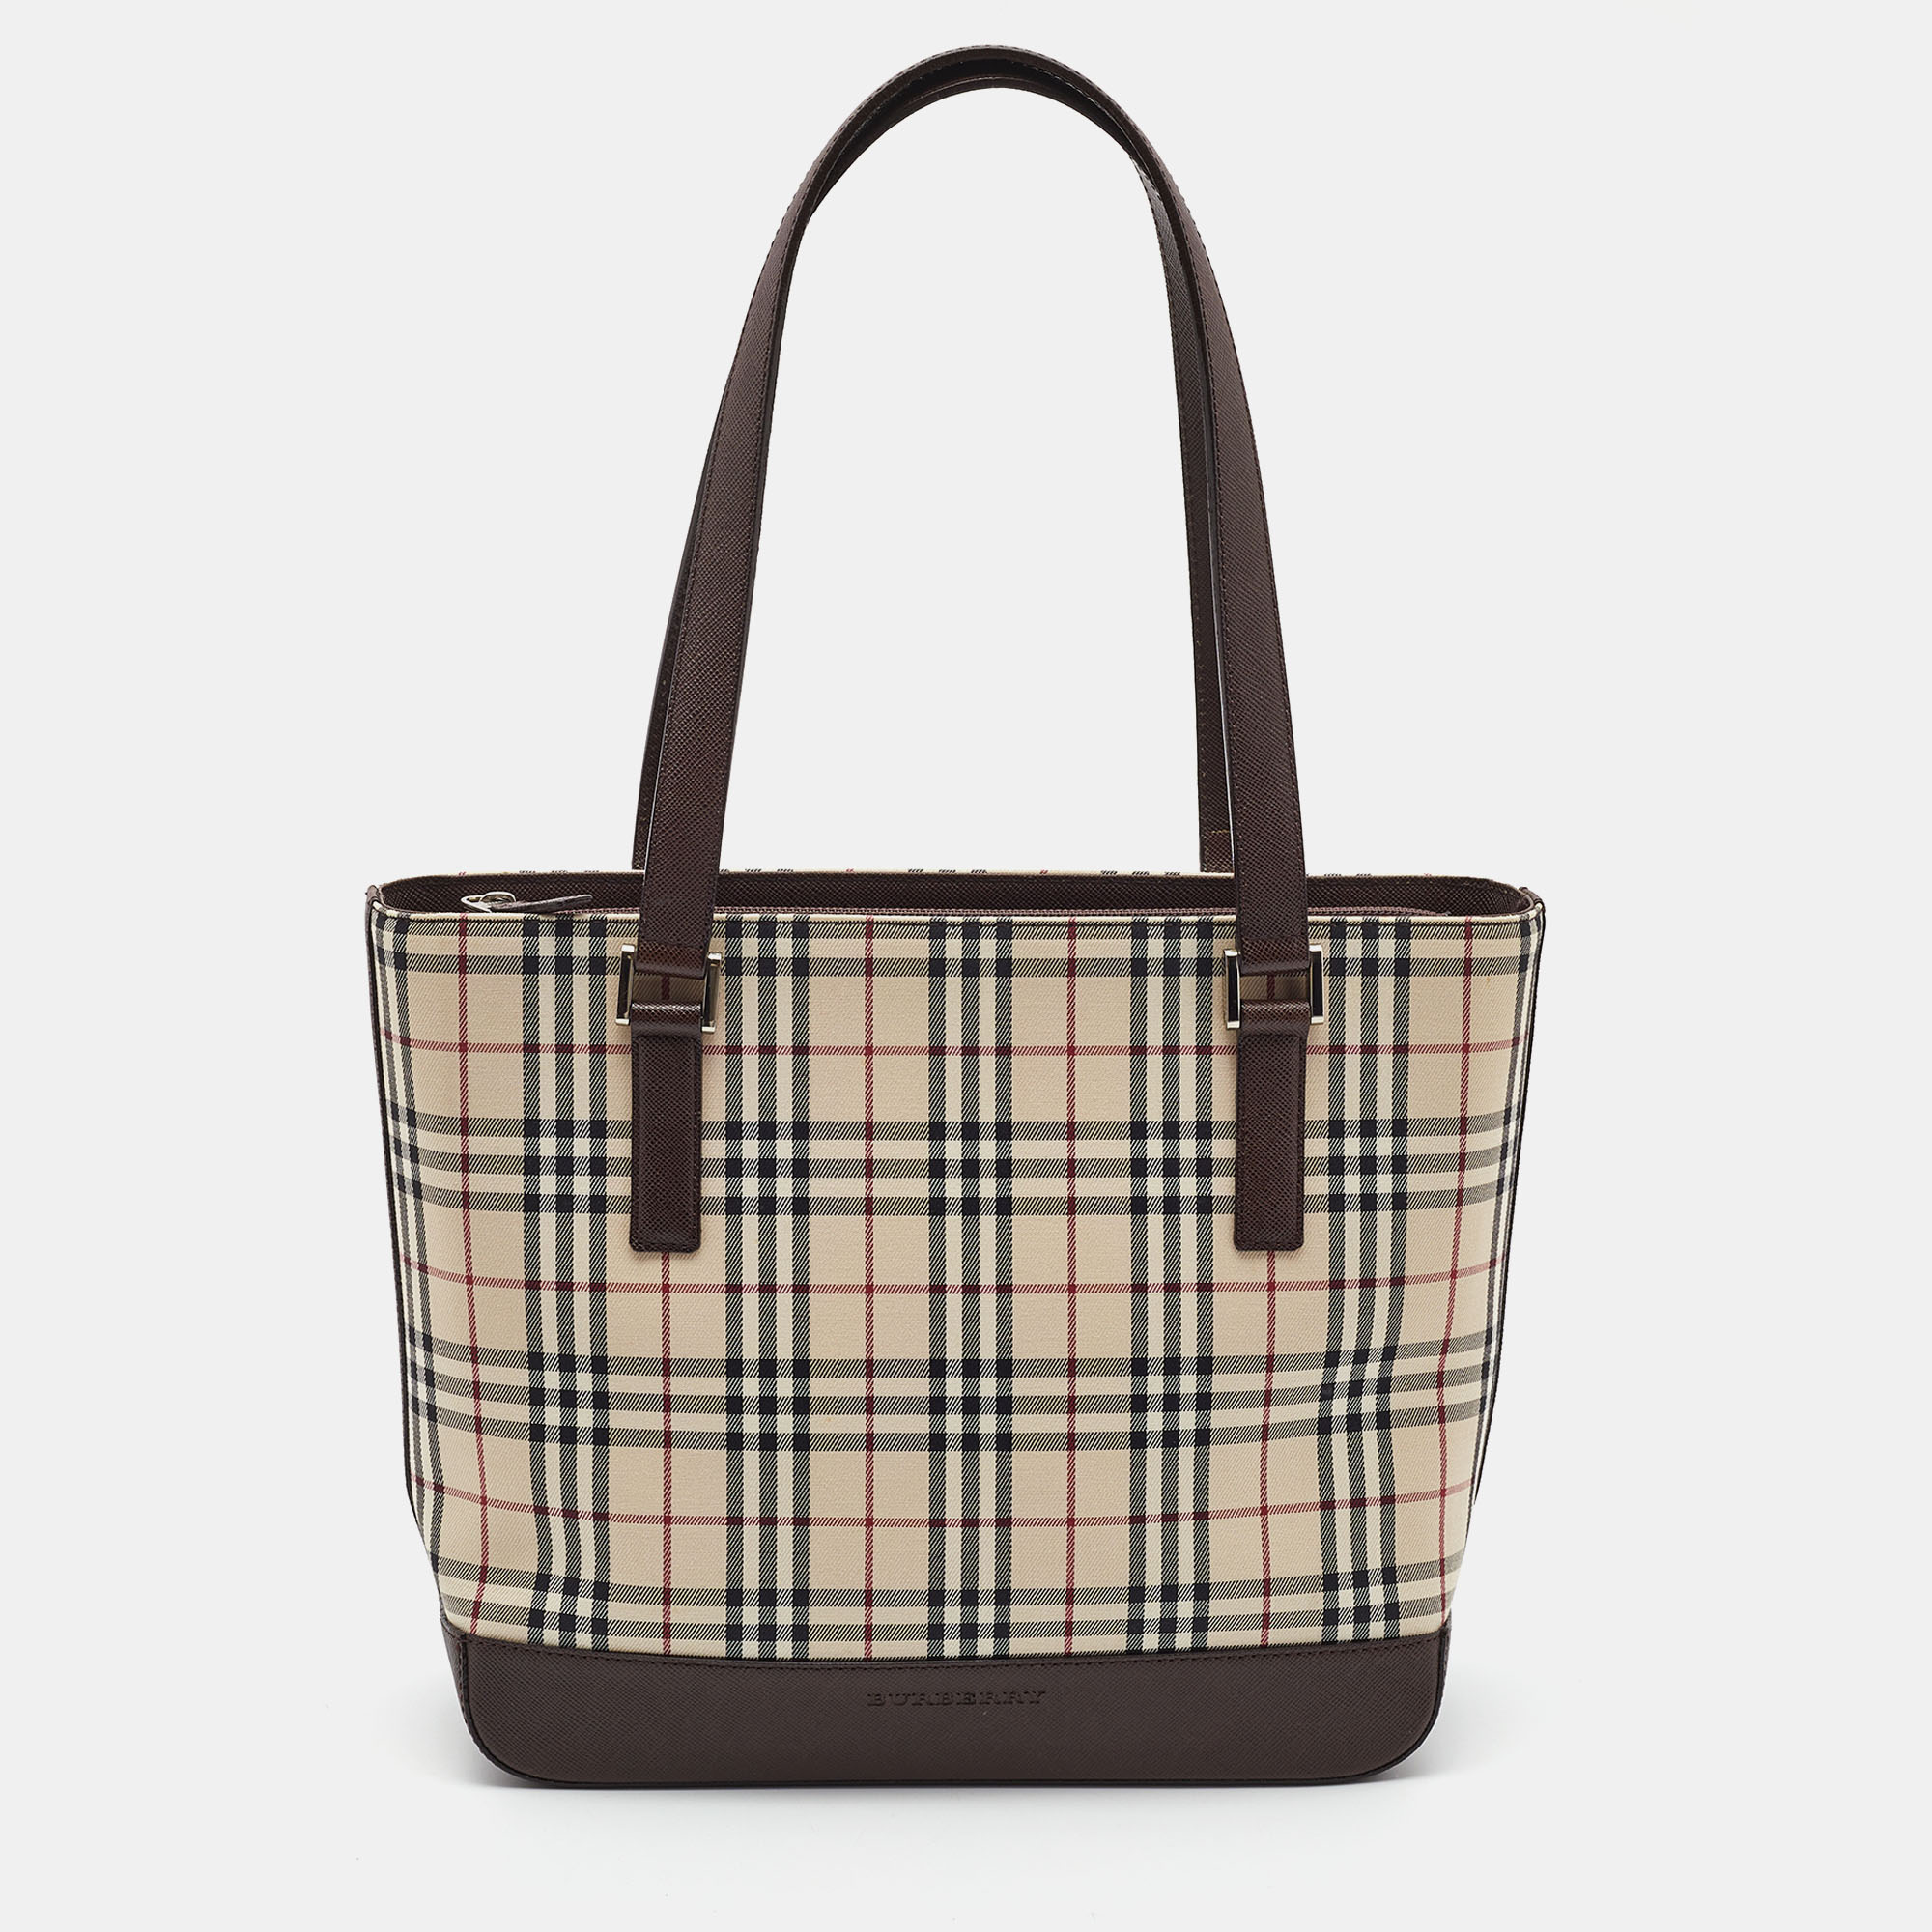 The fashion house's tradition of excellence coupled with modern design sensibilities works to make this Burberry bag one of a kind. Its a fabulous accessory for everyday use.